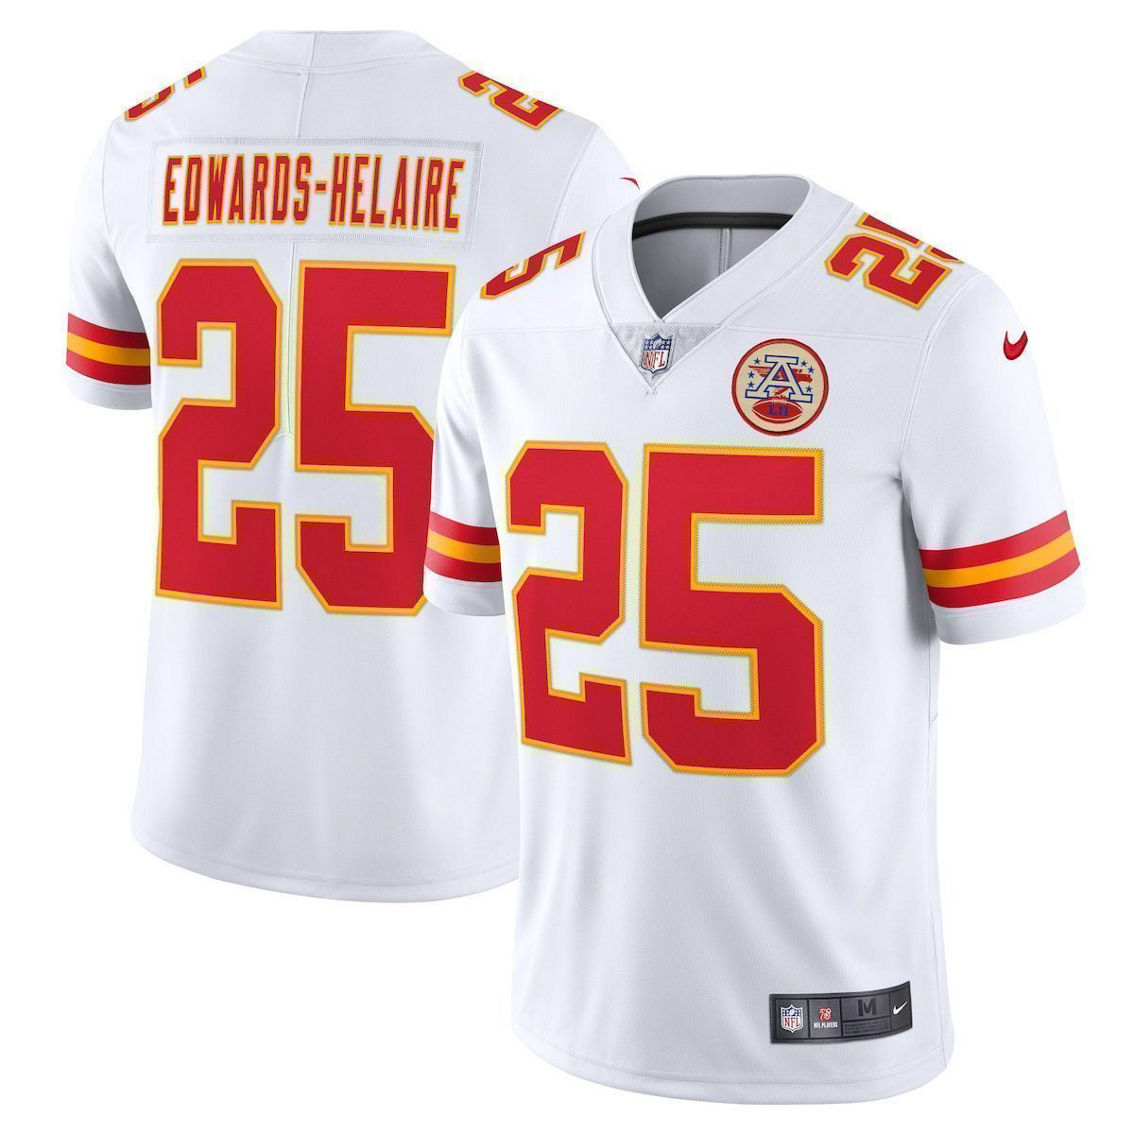 Nike Men's Clyde Edwards-Helaire White Kansas City Chiefs Vapor Limited Jersey - Image 2 of 4